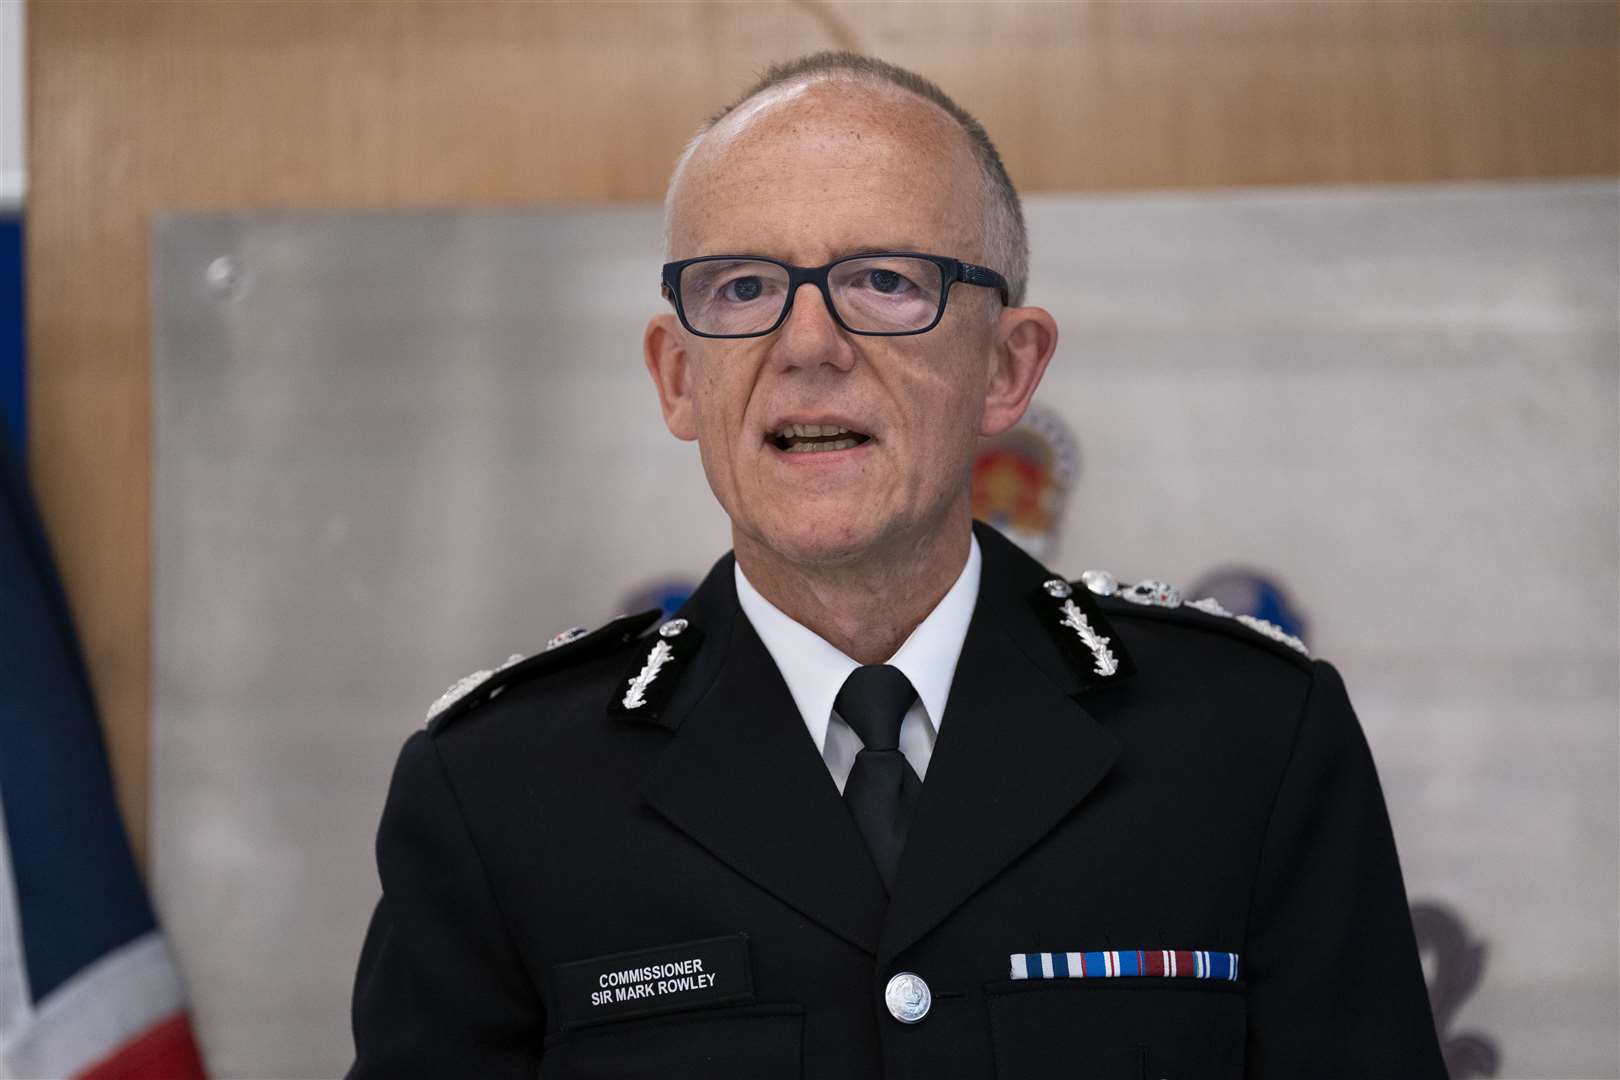 Sir Mark Rowley took over as Metropolitan Police Commissioner a week ago (Kirsty O’Connor/PA)